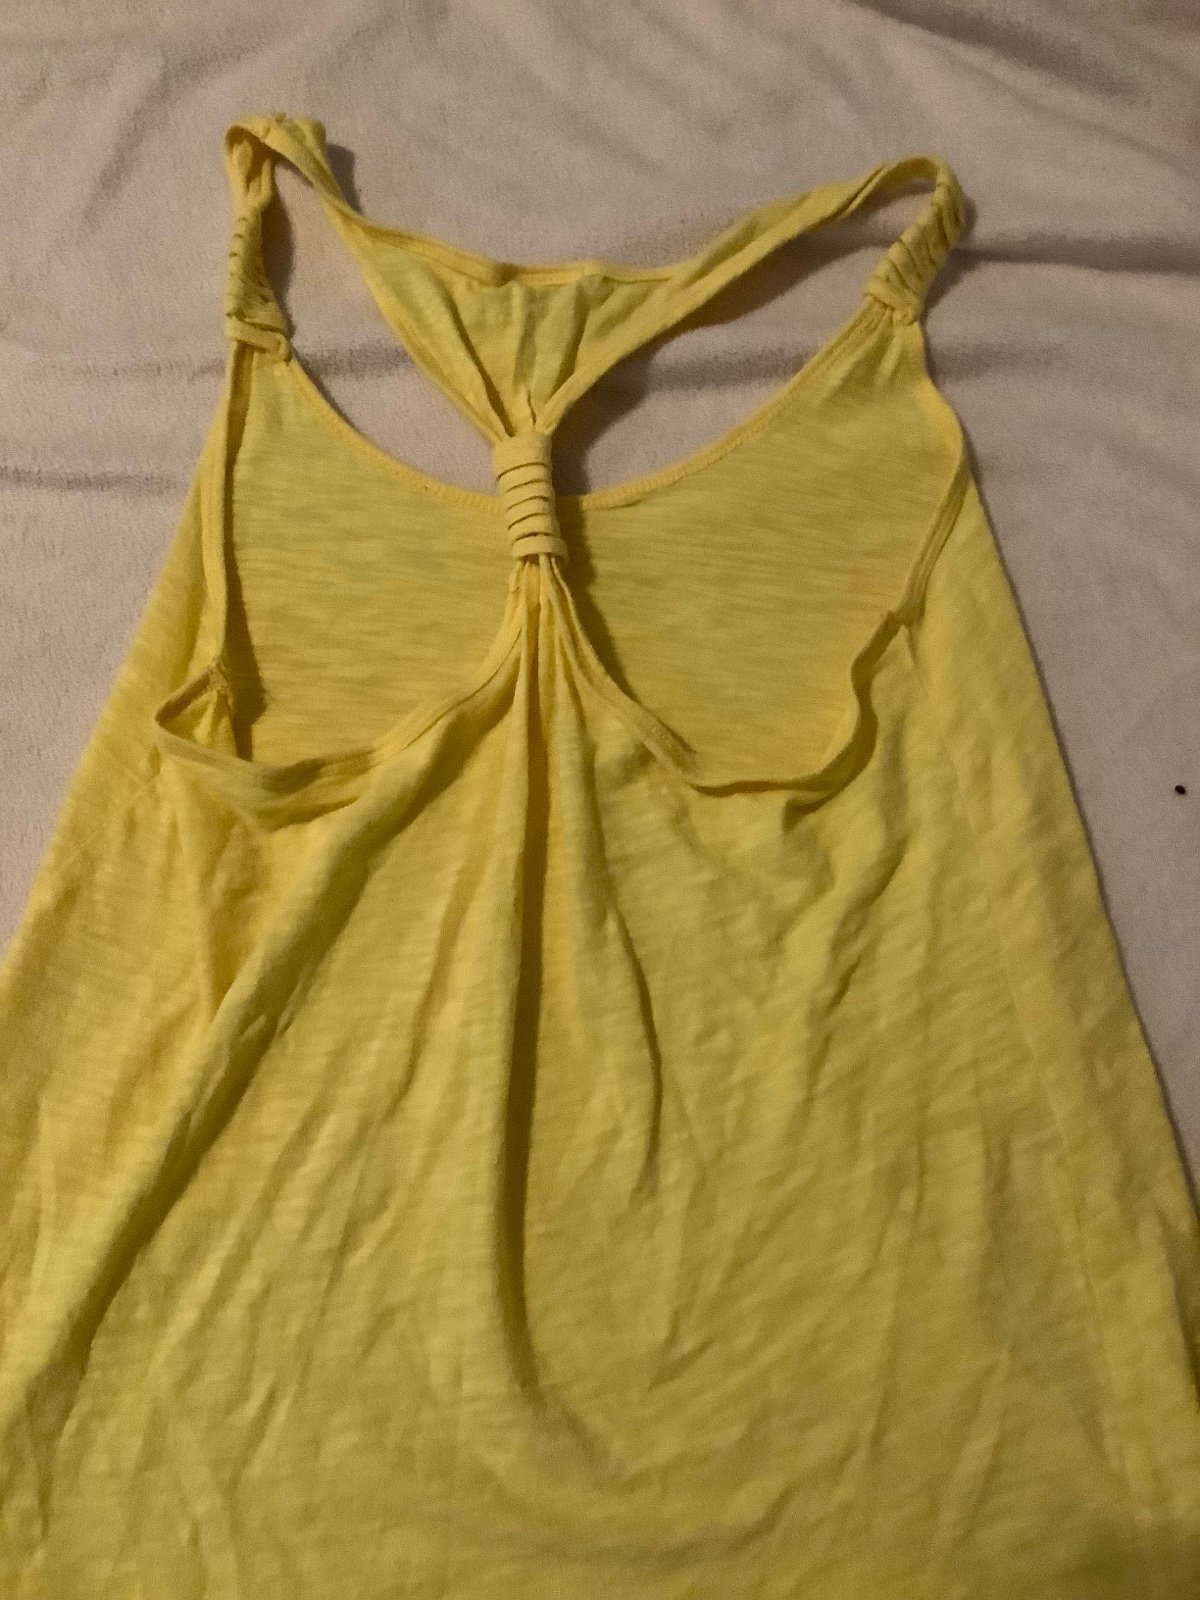 The Best Seller Neon yellow tank top HK8KQ1QK5 Counter Genuine 